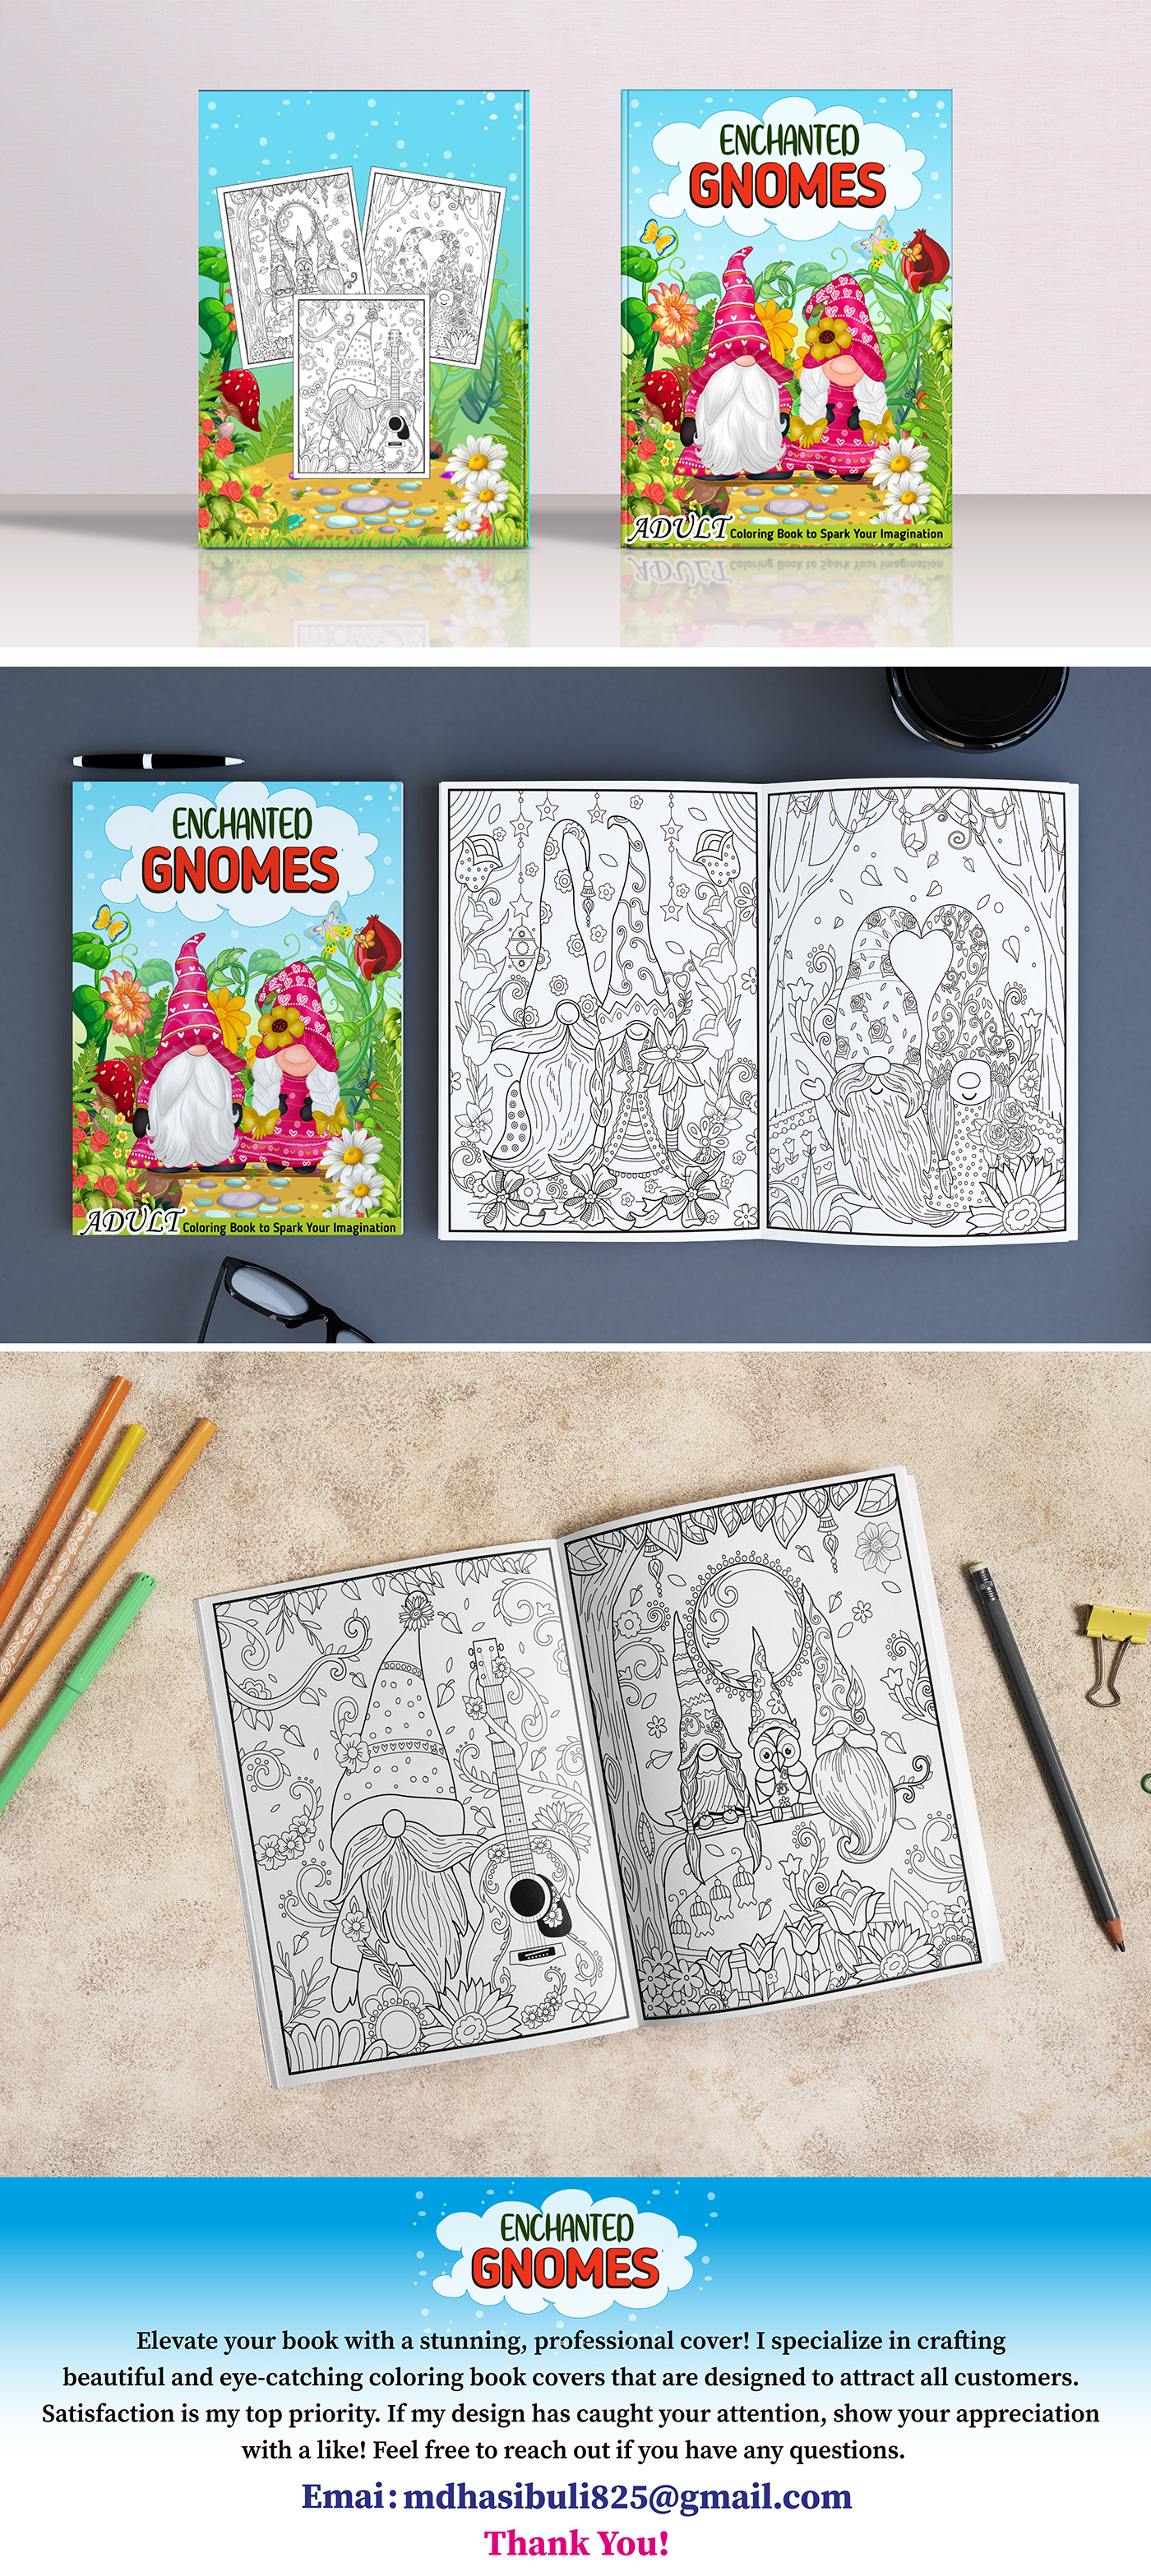 coloring book bookcoverdesign Coloring Pages activity book children's book kdp amazon kdp Adult bookcover gnomes coloring book